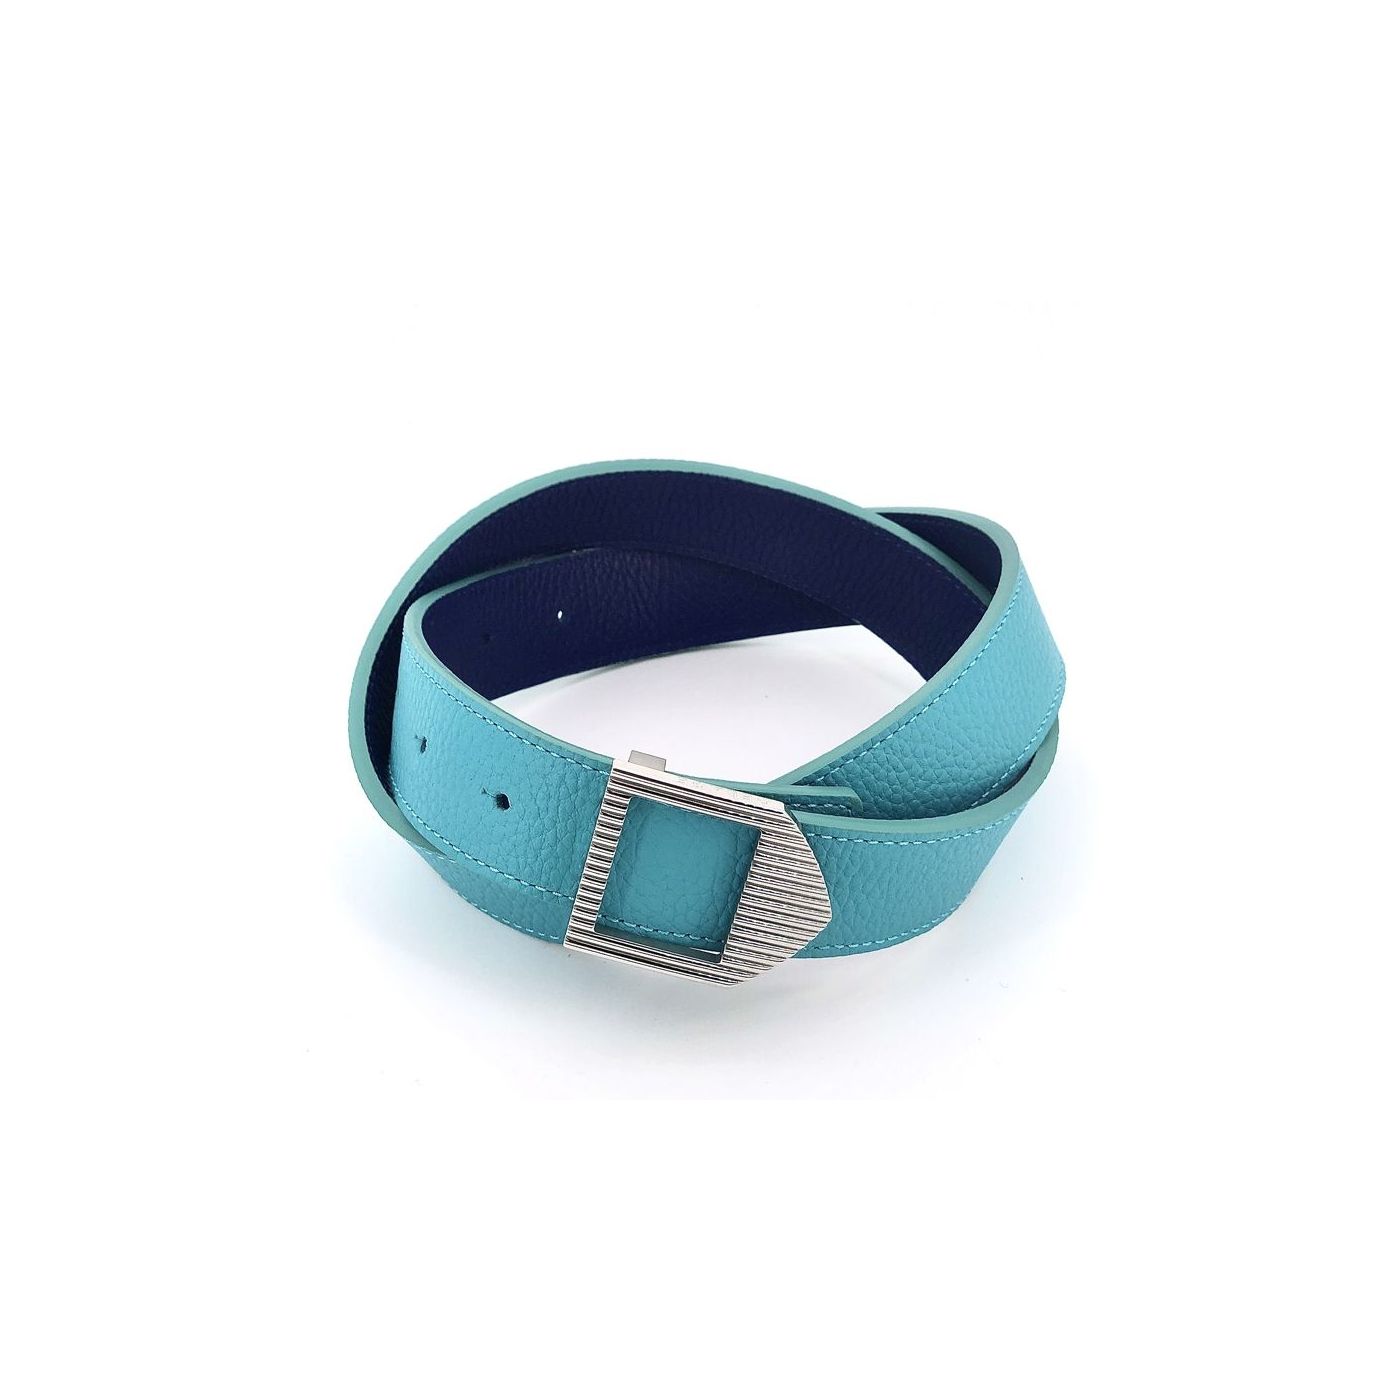 Reversible leather belt turquoise & blue / silver buckle